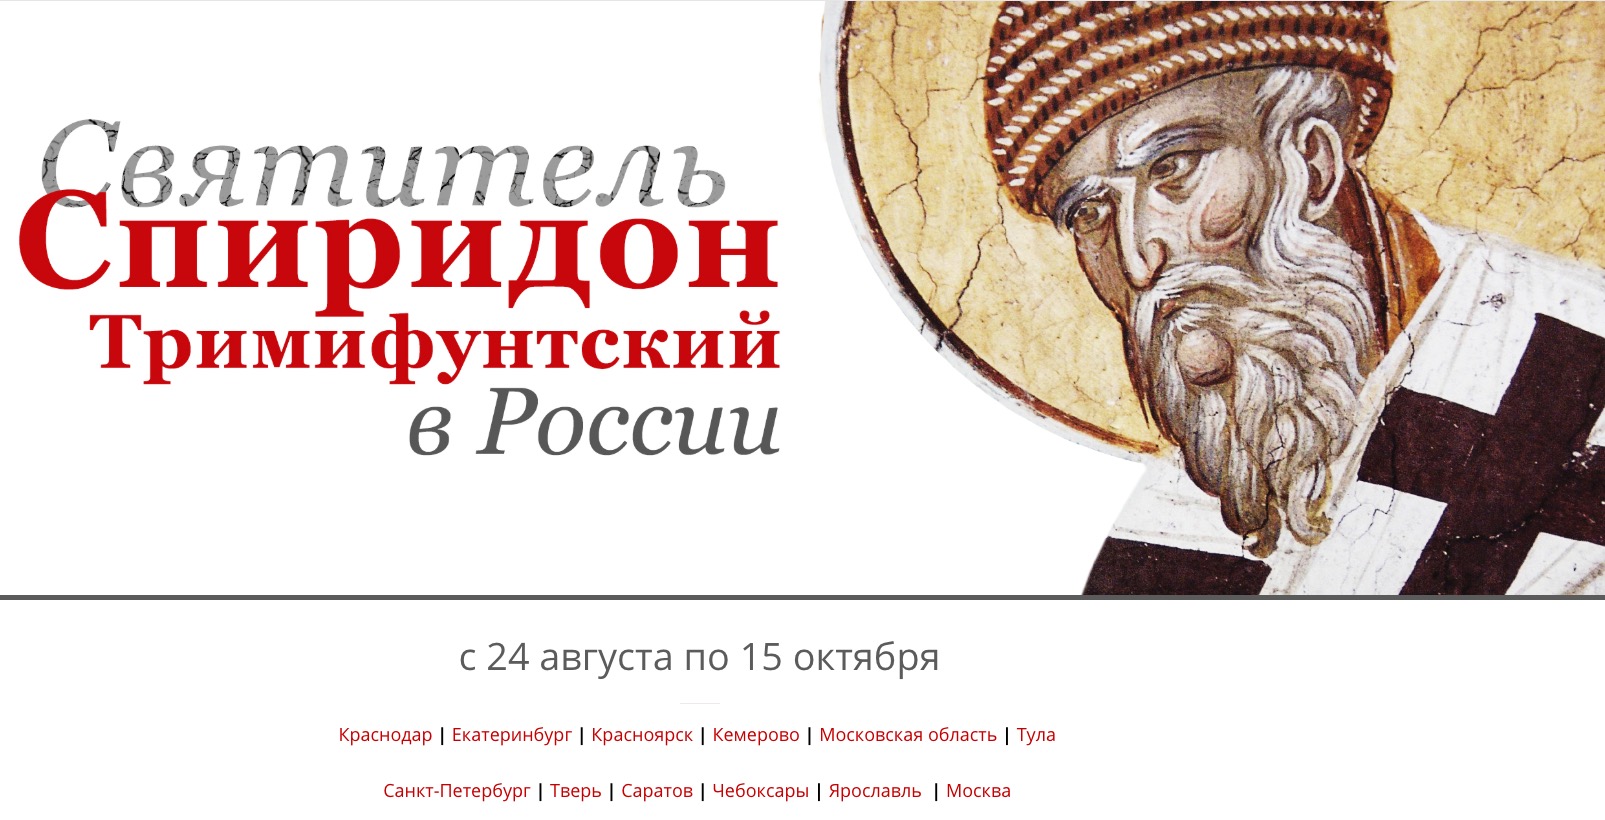 A website dedicated to the arrival of saint spyridon’s relics in russia